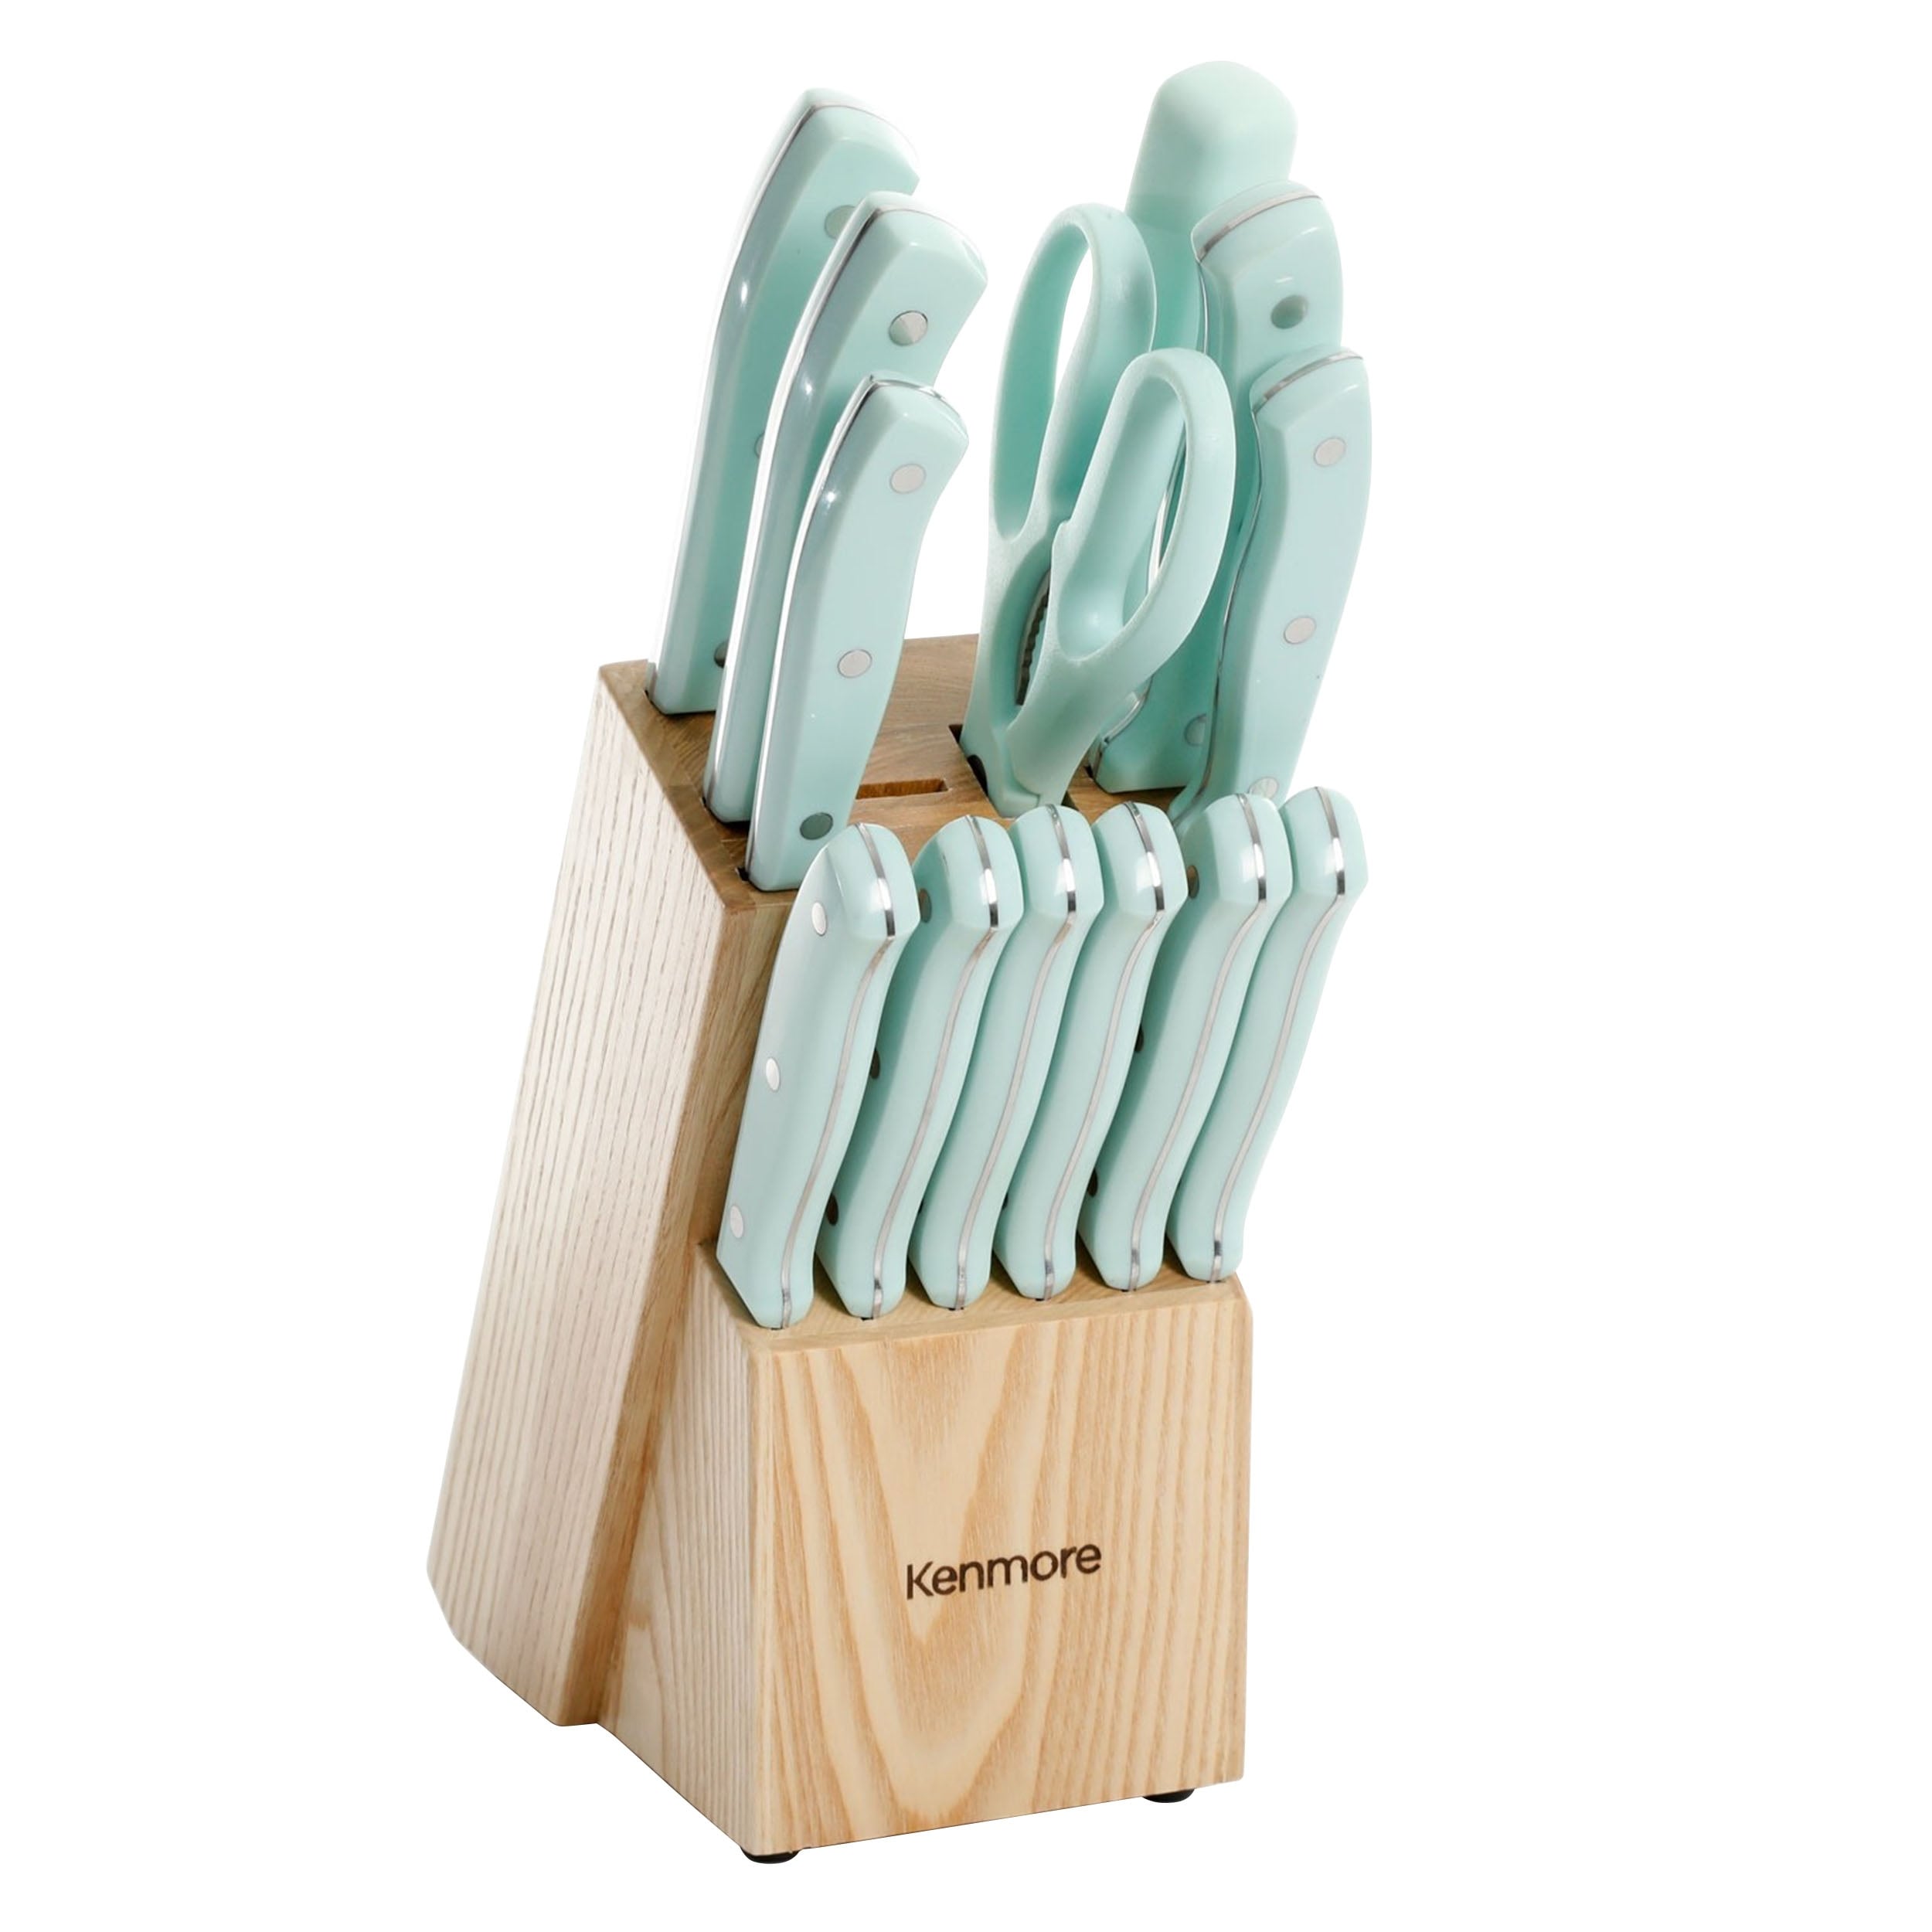 BergHOFF International Smart Knife 20pc Forged Knife Set with